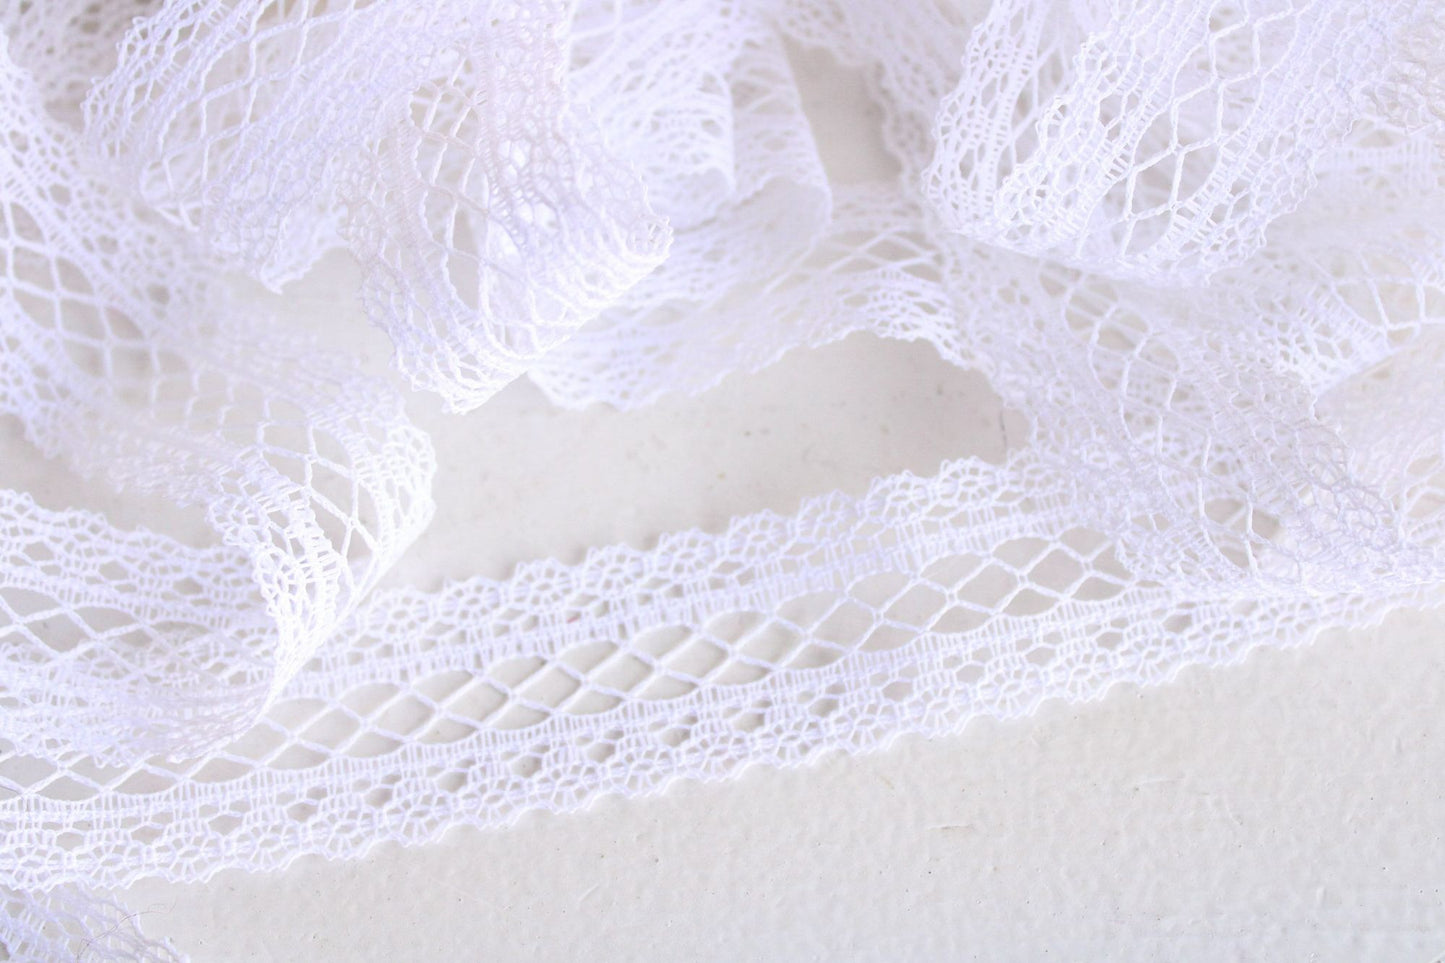 Vintage White Lace Trim With A Lattice Pattern, 1.25" Wide 2 Yards